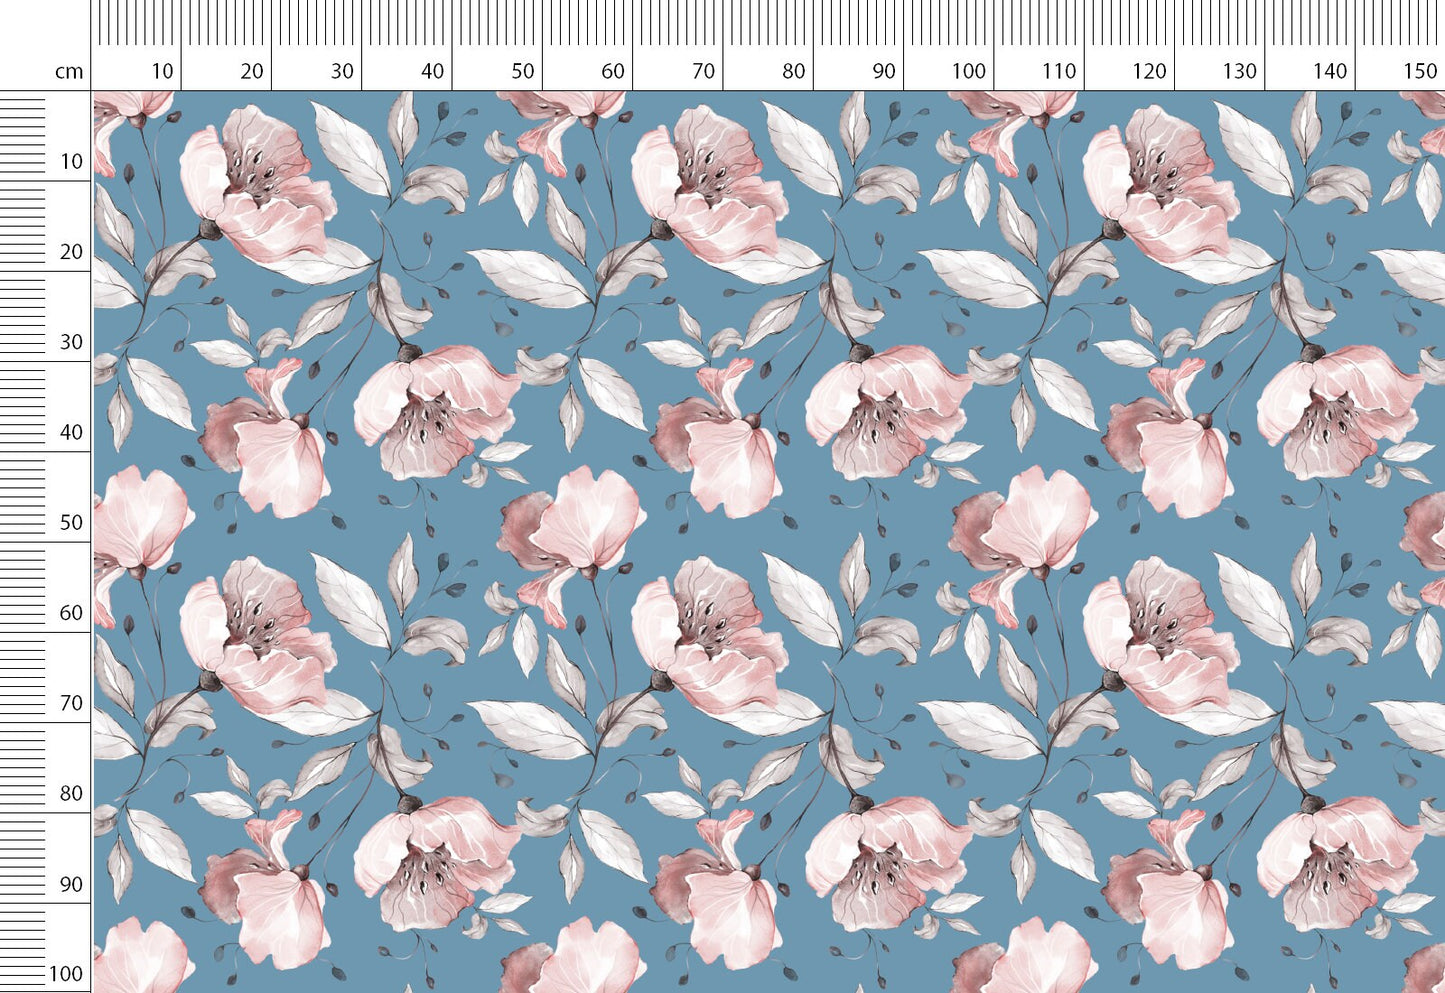 Floral Linen Fabric By The Yard or Meter, Natural Floral Print Linen Fabric For Clothing & Home Textile